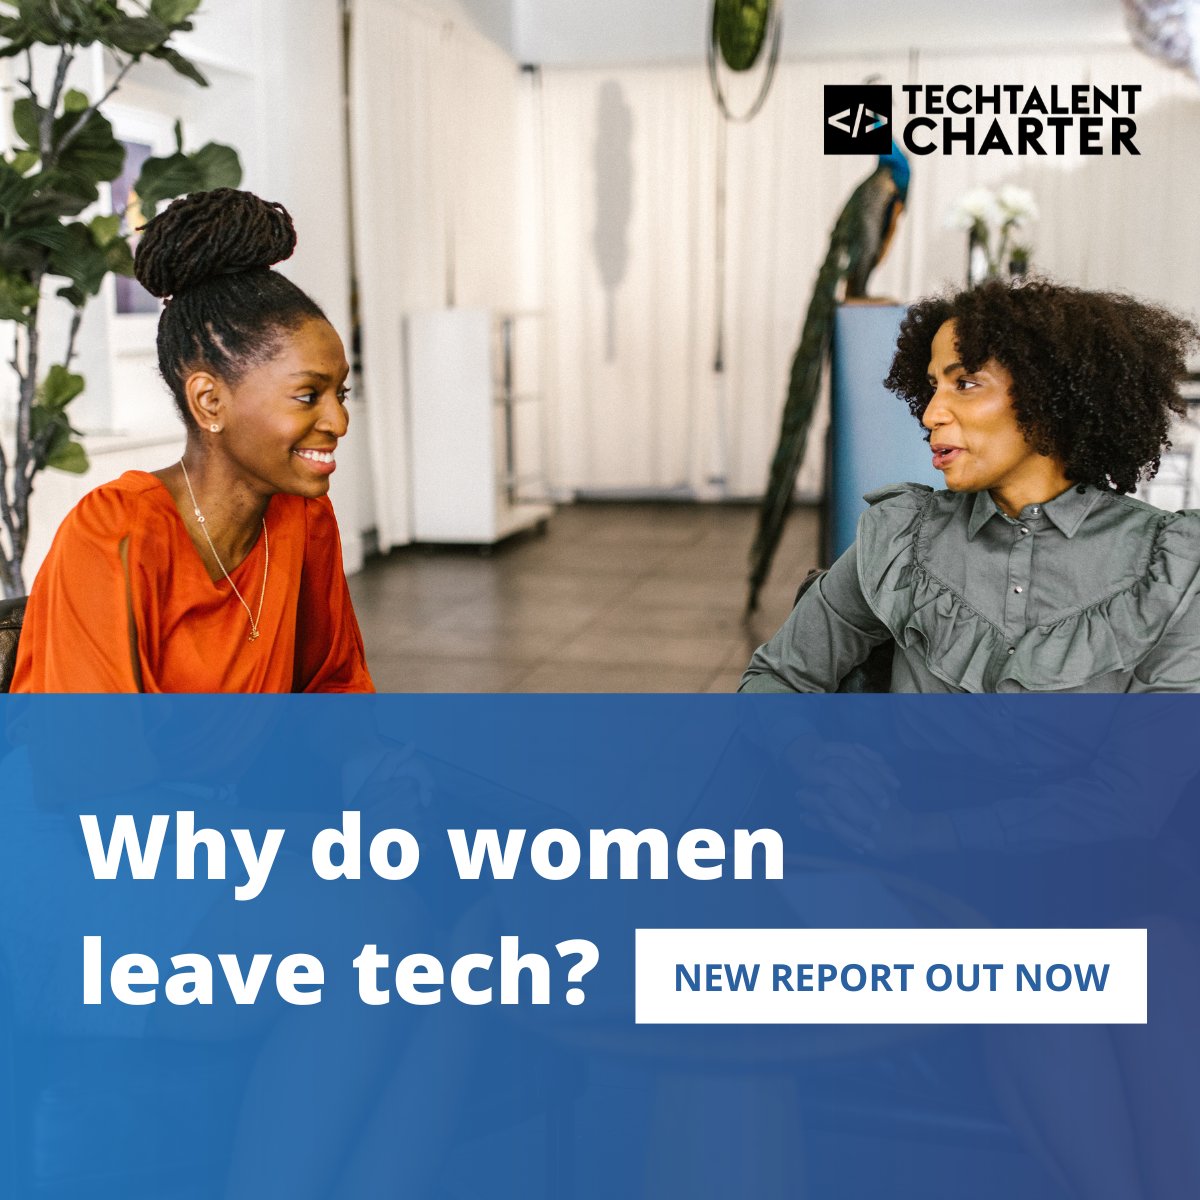 Why do women leave tech roles? We partnered with @AskAttest, sponsored by @SciTechgovuk, to get updated and UK specific answers to this question. The data offers real, actionable solutions. Learn more: hubs.la/Q0226scq0 #WomenInTech #DiversityInTech #TechUK